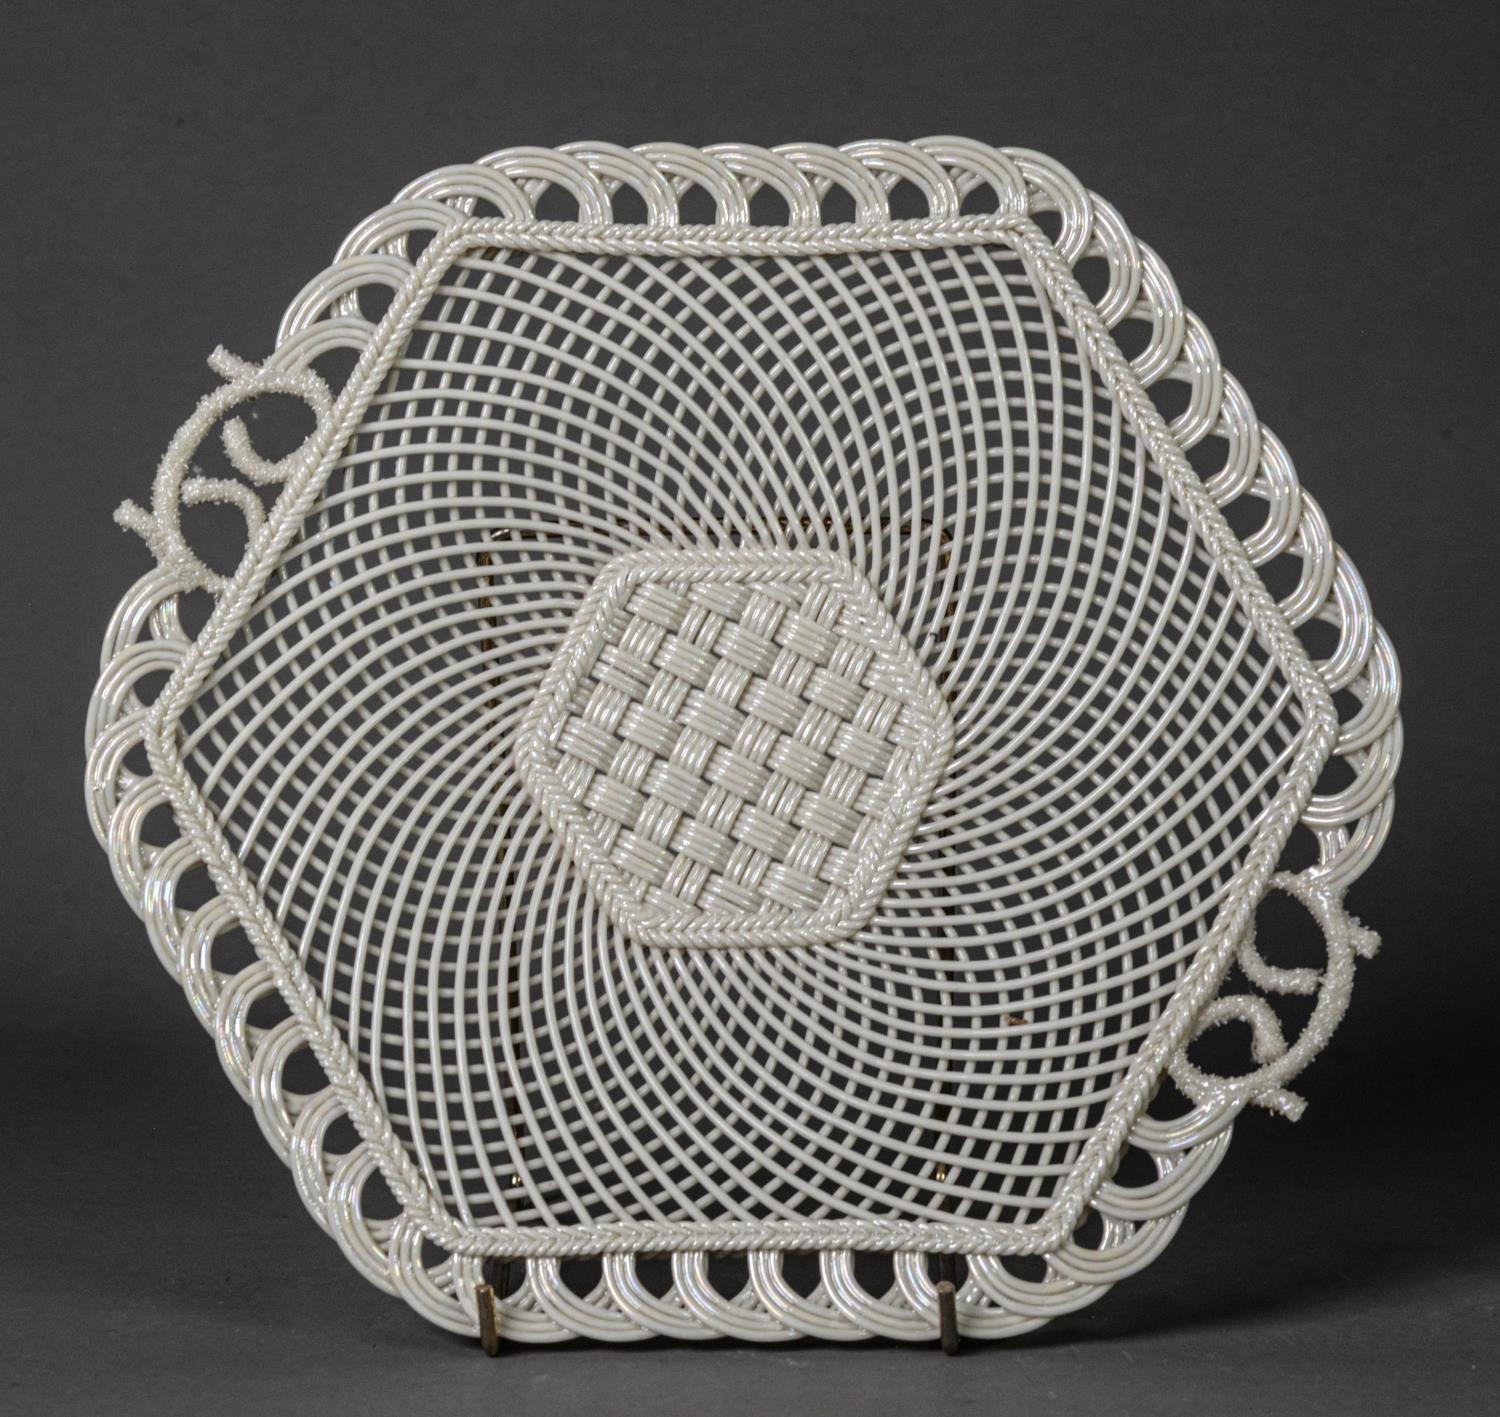 BELLEEK PORCELAIN TWO HANDLED SERVING PLATE, of hexagonal form with ozier pattern panel to the woven